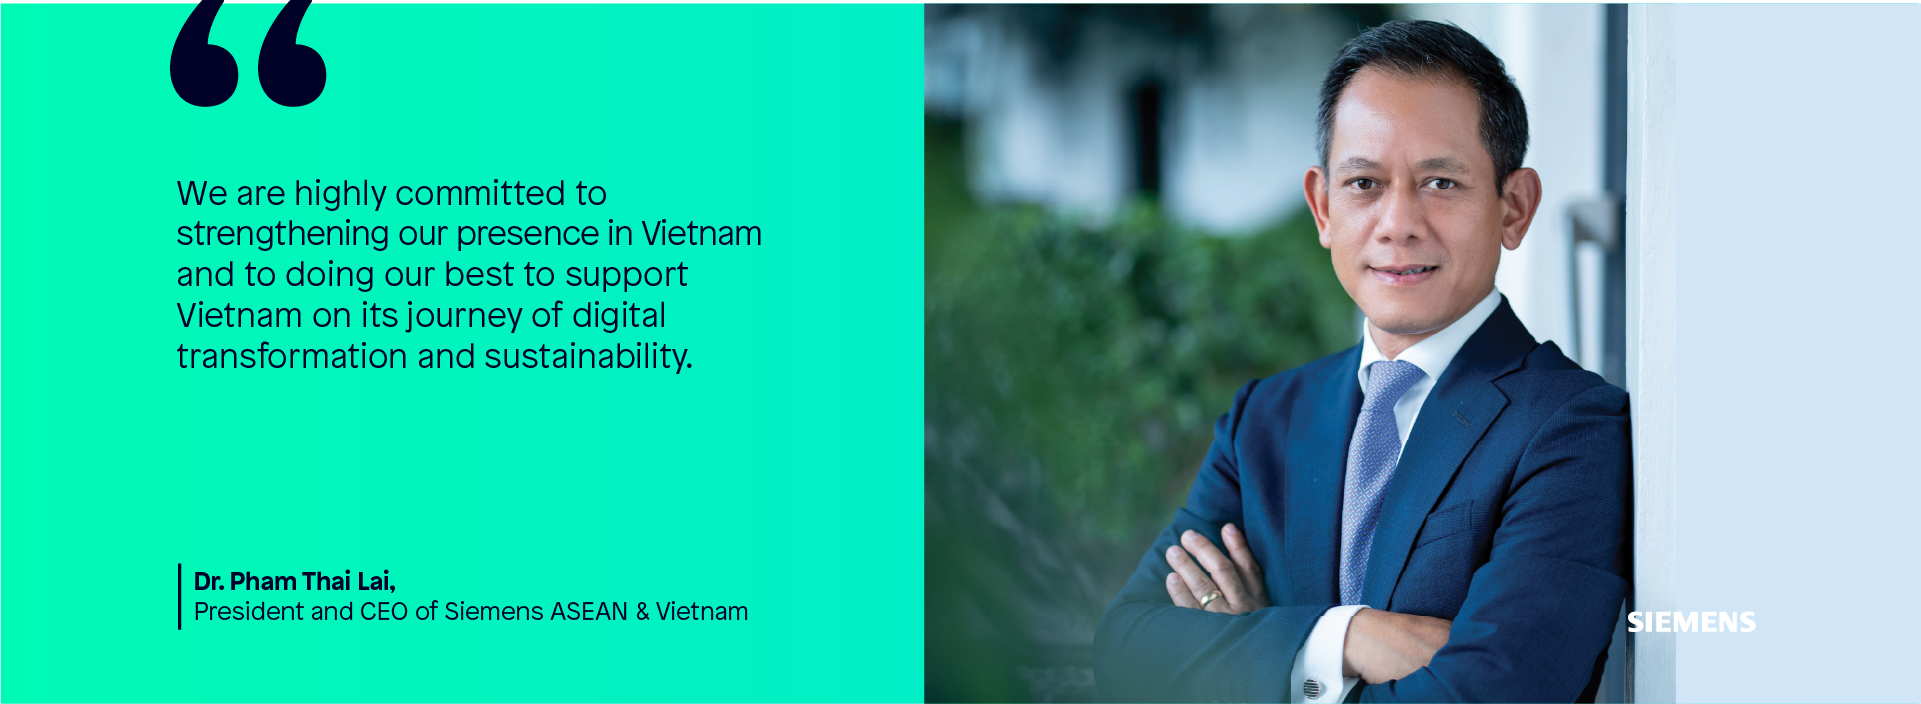 Transforming the everyday in Vietnam for 30 years - Ảnh 5